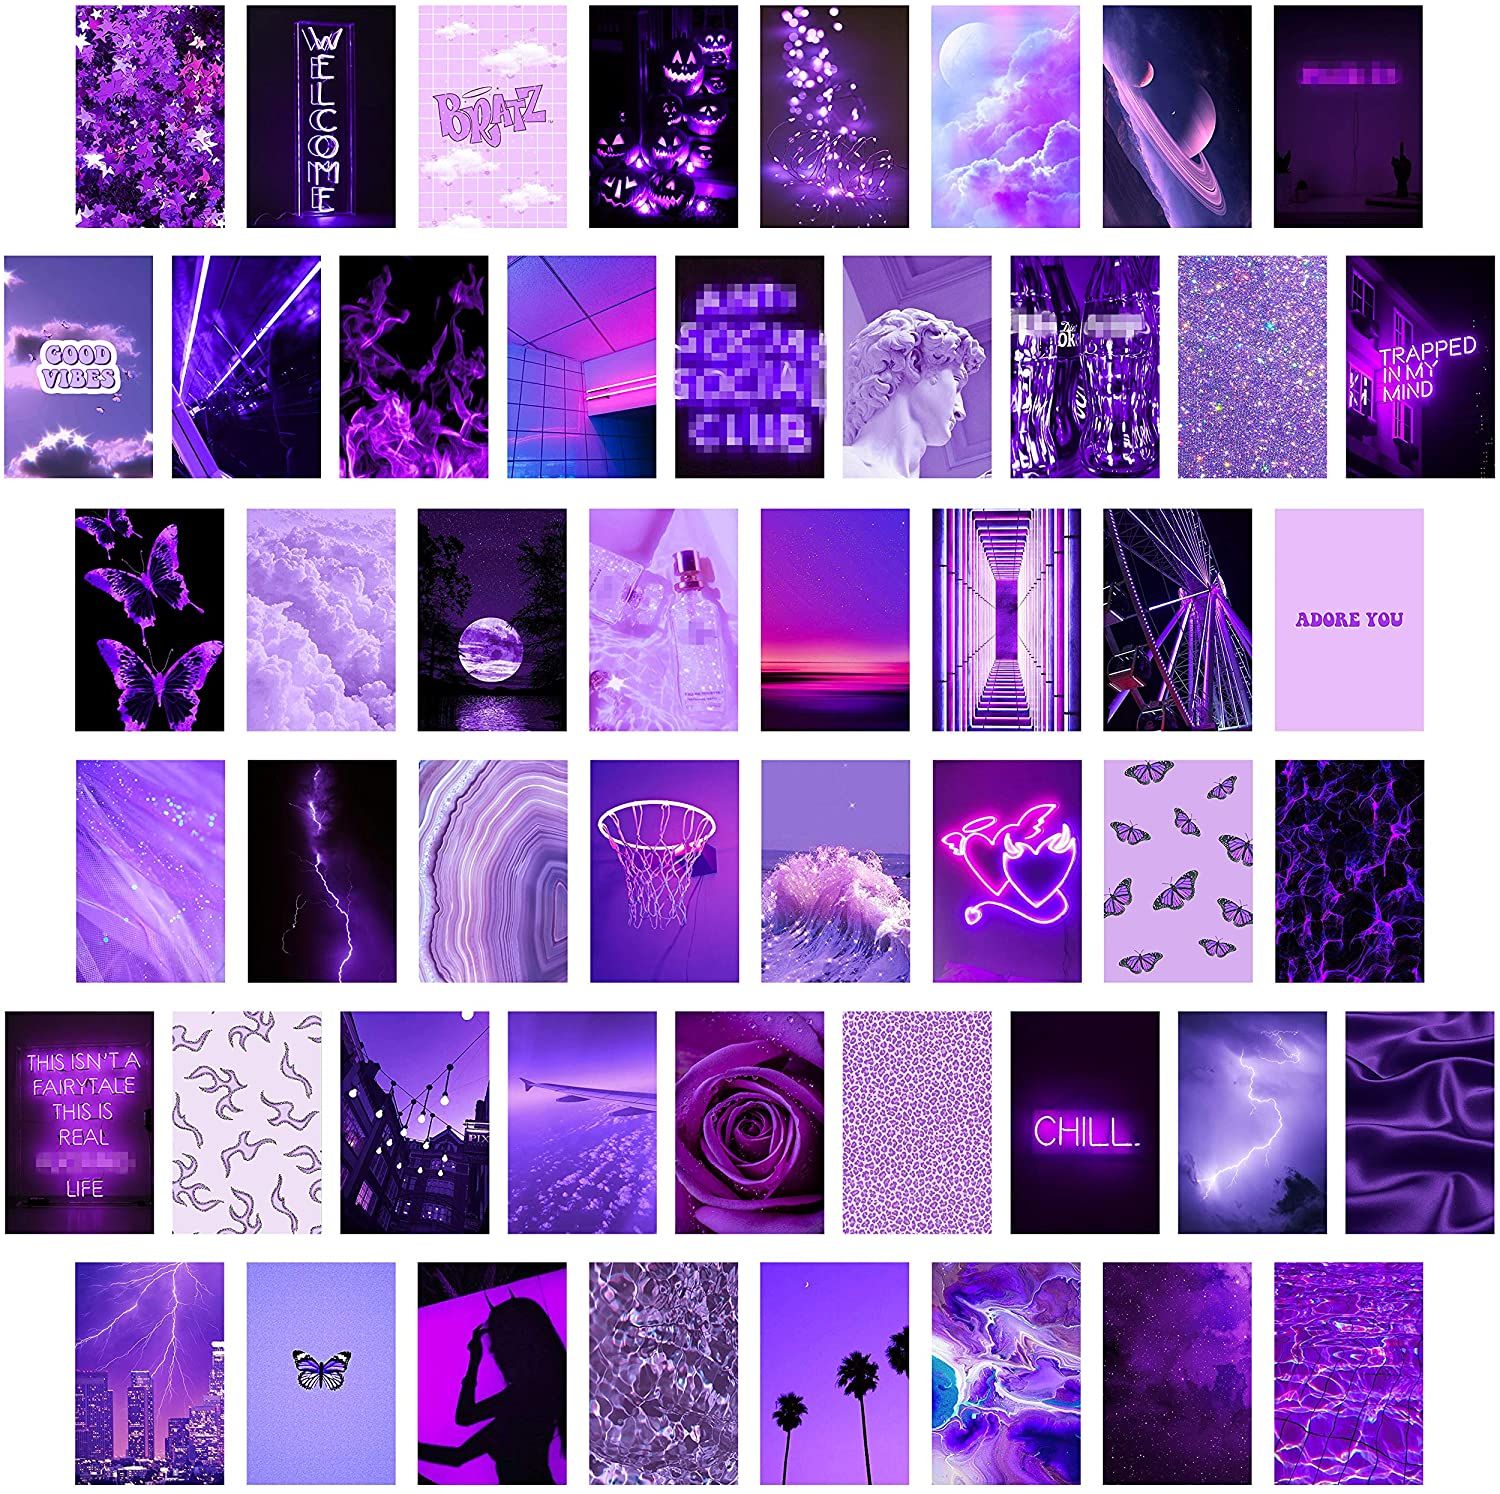 CY2SIDE 50PCS Purple Aesthetic Picture for Wall Collage, 50 Set 4x6 inch, Neon Collage Print Kit, Euphoria Room Decor for Girl, Wall Art Prints for Room, Dorm Photo Display, VSCO Posters